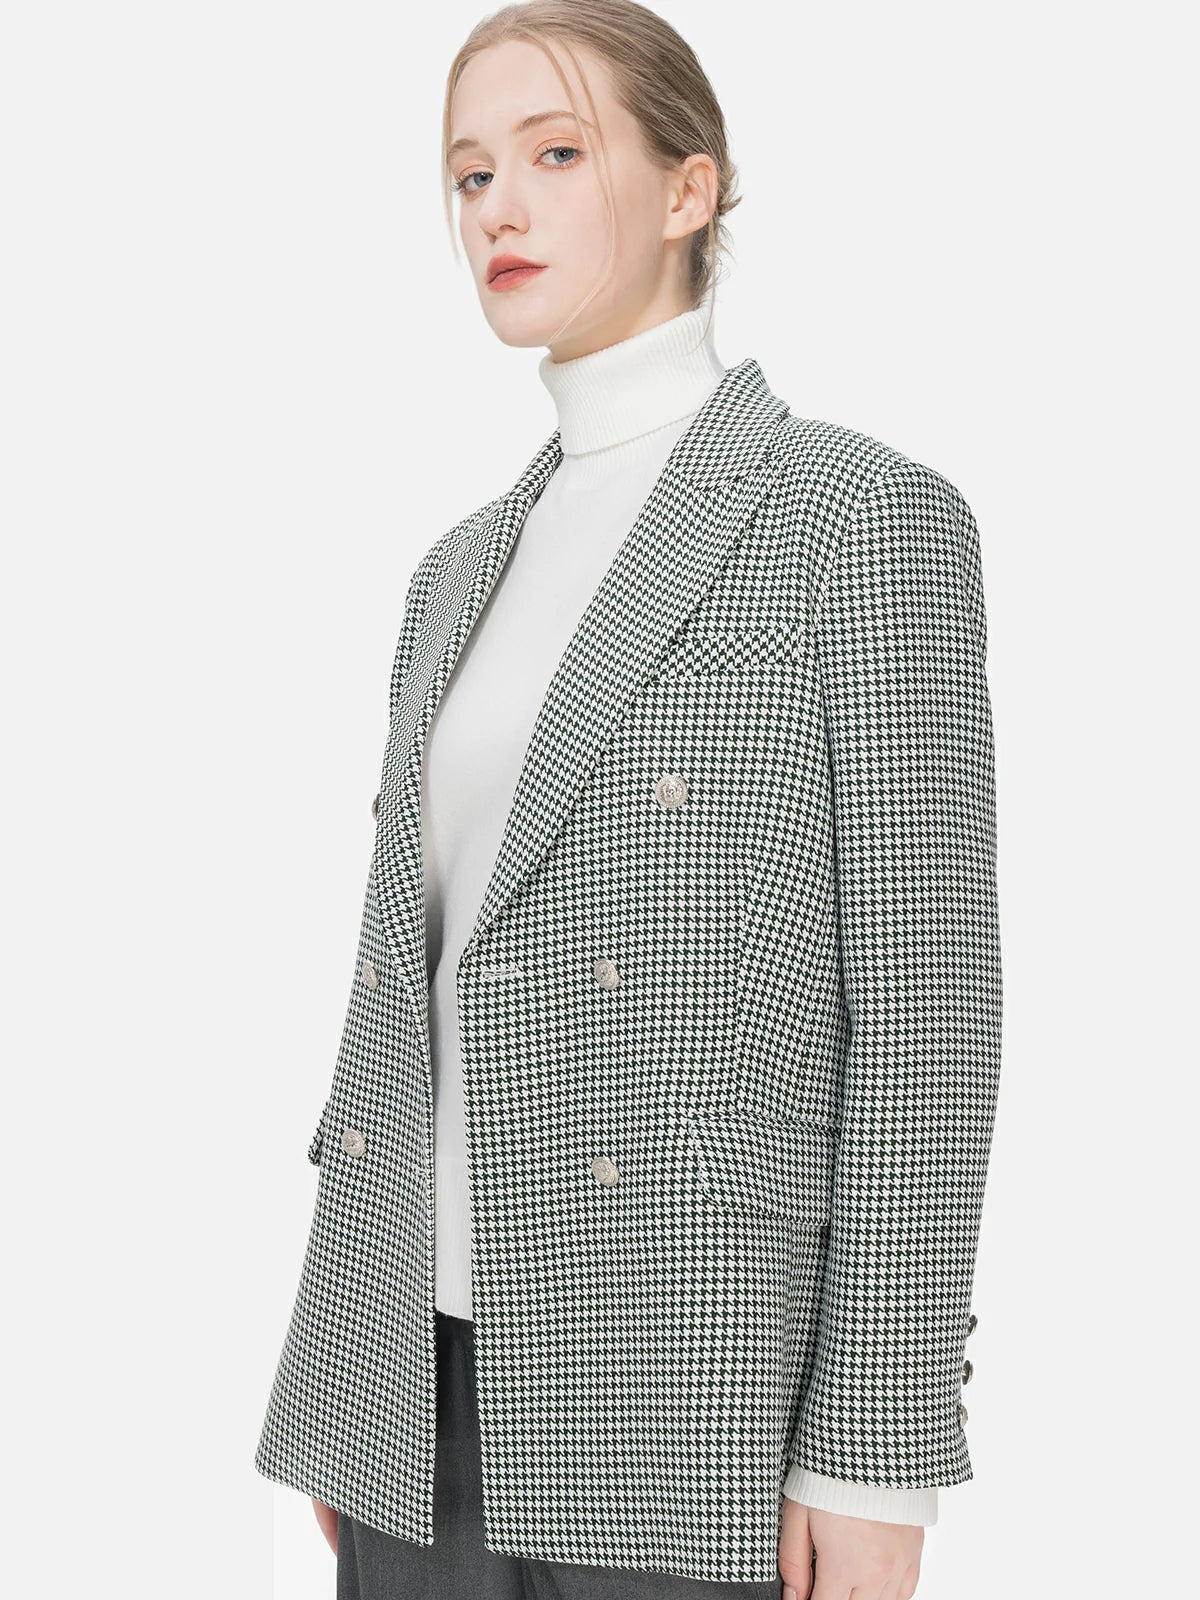 Make a fashion statement with this meticulously tailored green-toned houndstooth blazer, showcasing padded shoulders and a double-breasted design.